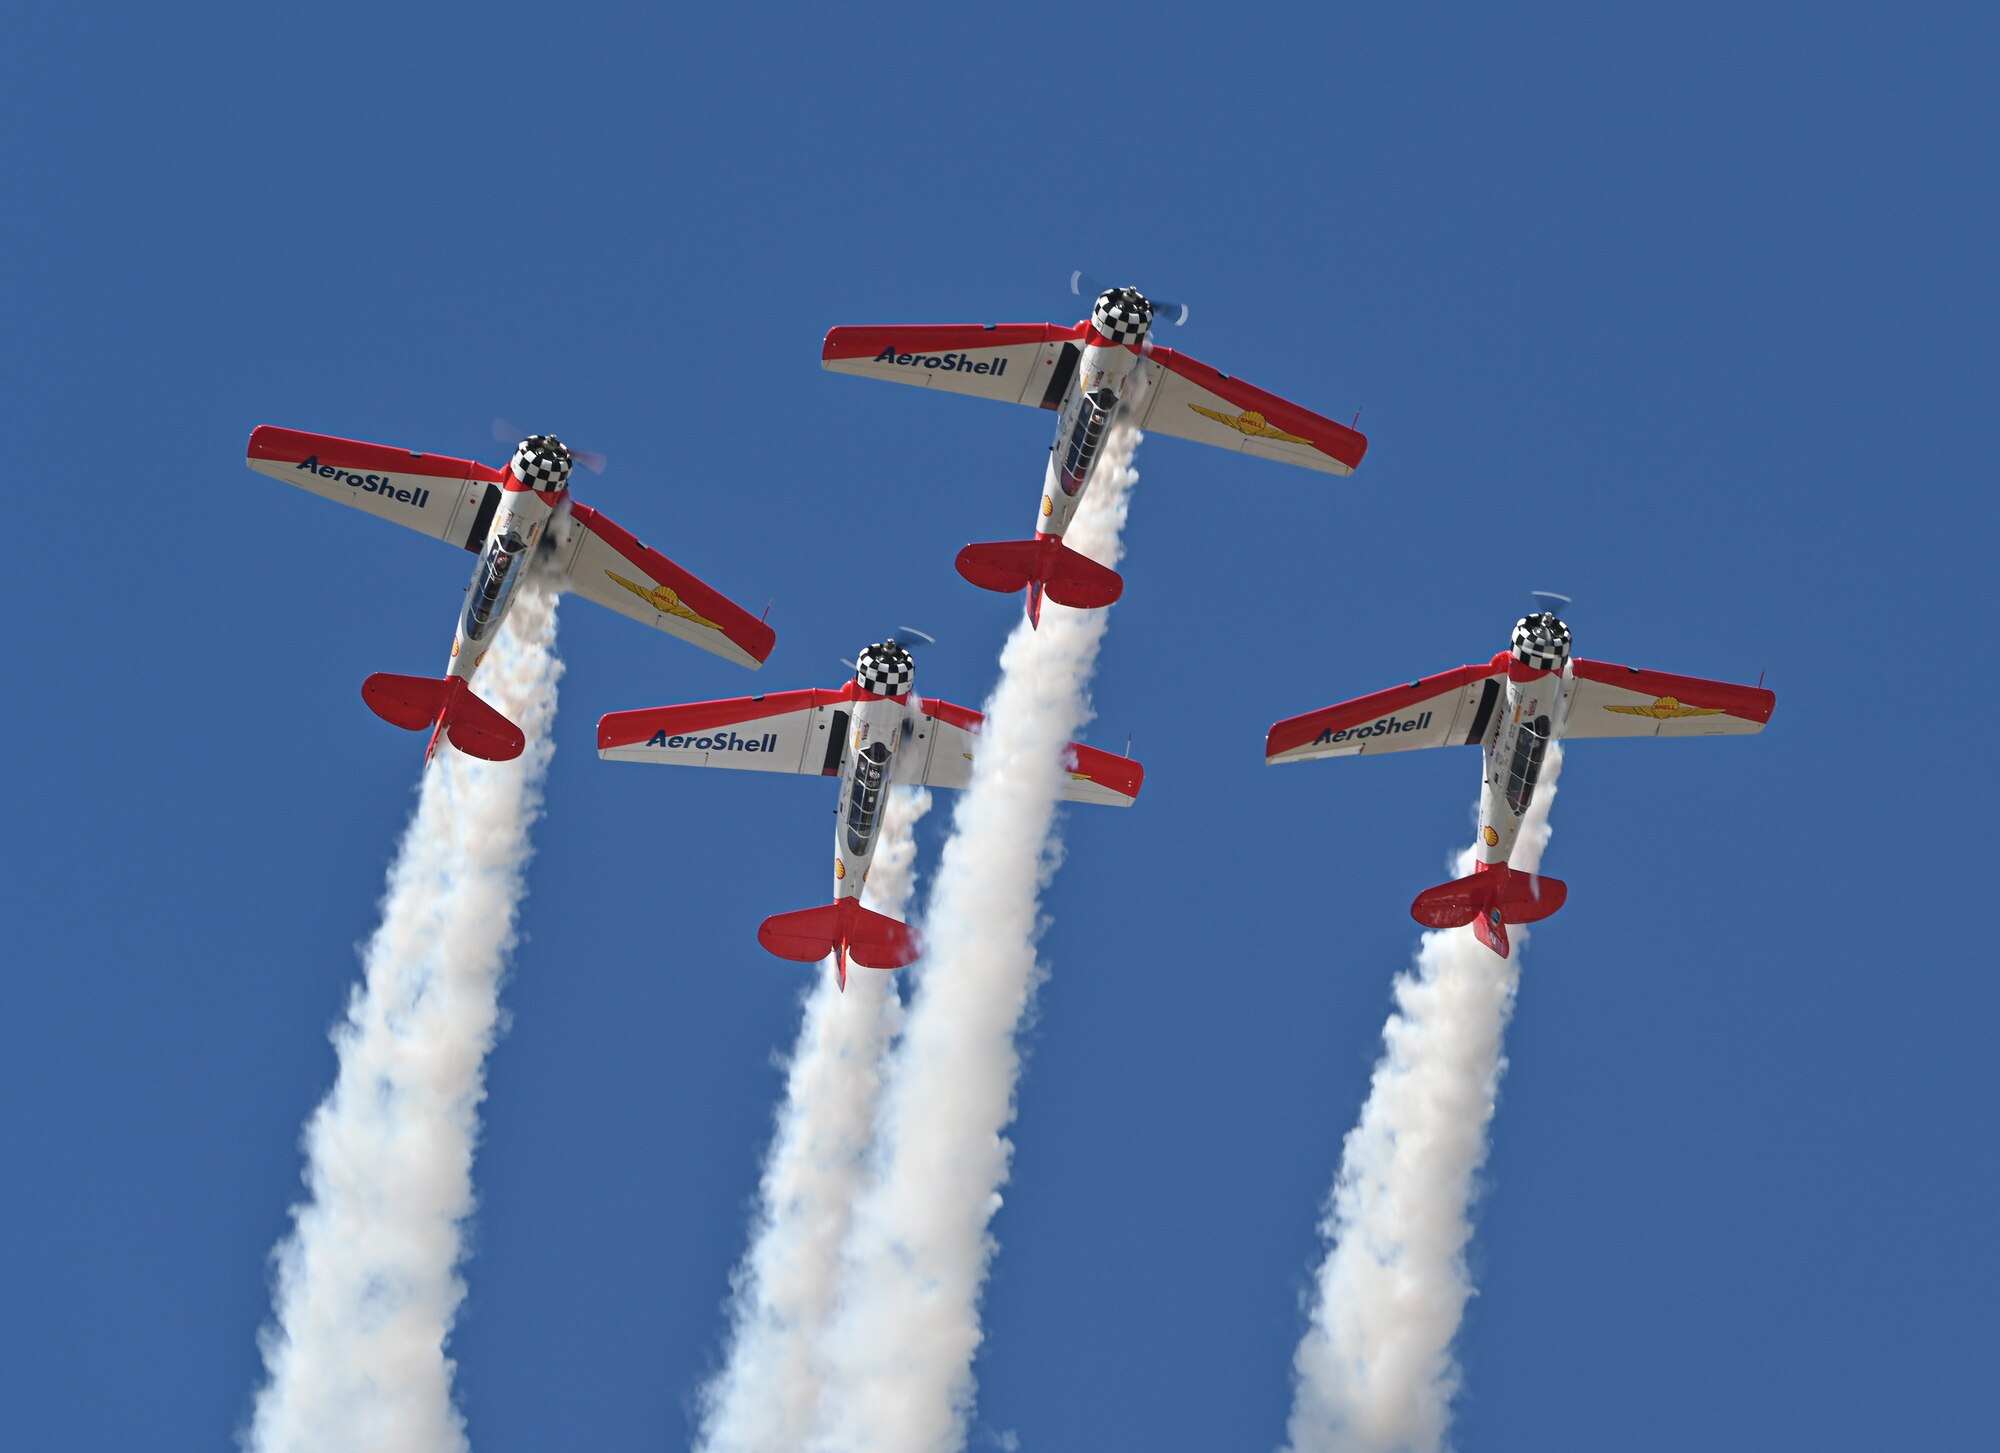 The AeroShell Aerobatic Team performs an aerial maneuver at the 2022 Wings Over Columbus Airshow on March 26, 2022, at Columbus Air Force Base, Miss. The AeroShell Aerobatic Team performs tight formation aerial maneuvers in front of millions of airshow fans all over North America. (U.S. Air Force photo by Senior Airman Davis Donaldson)